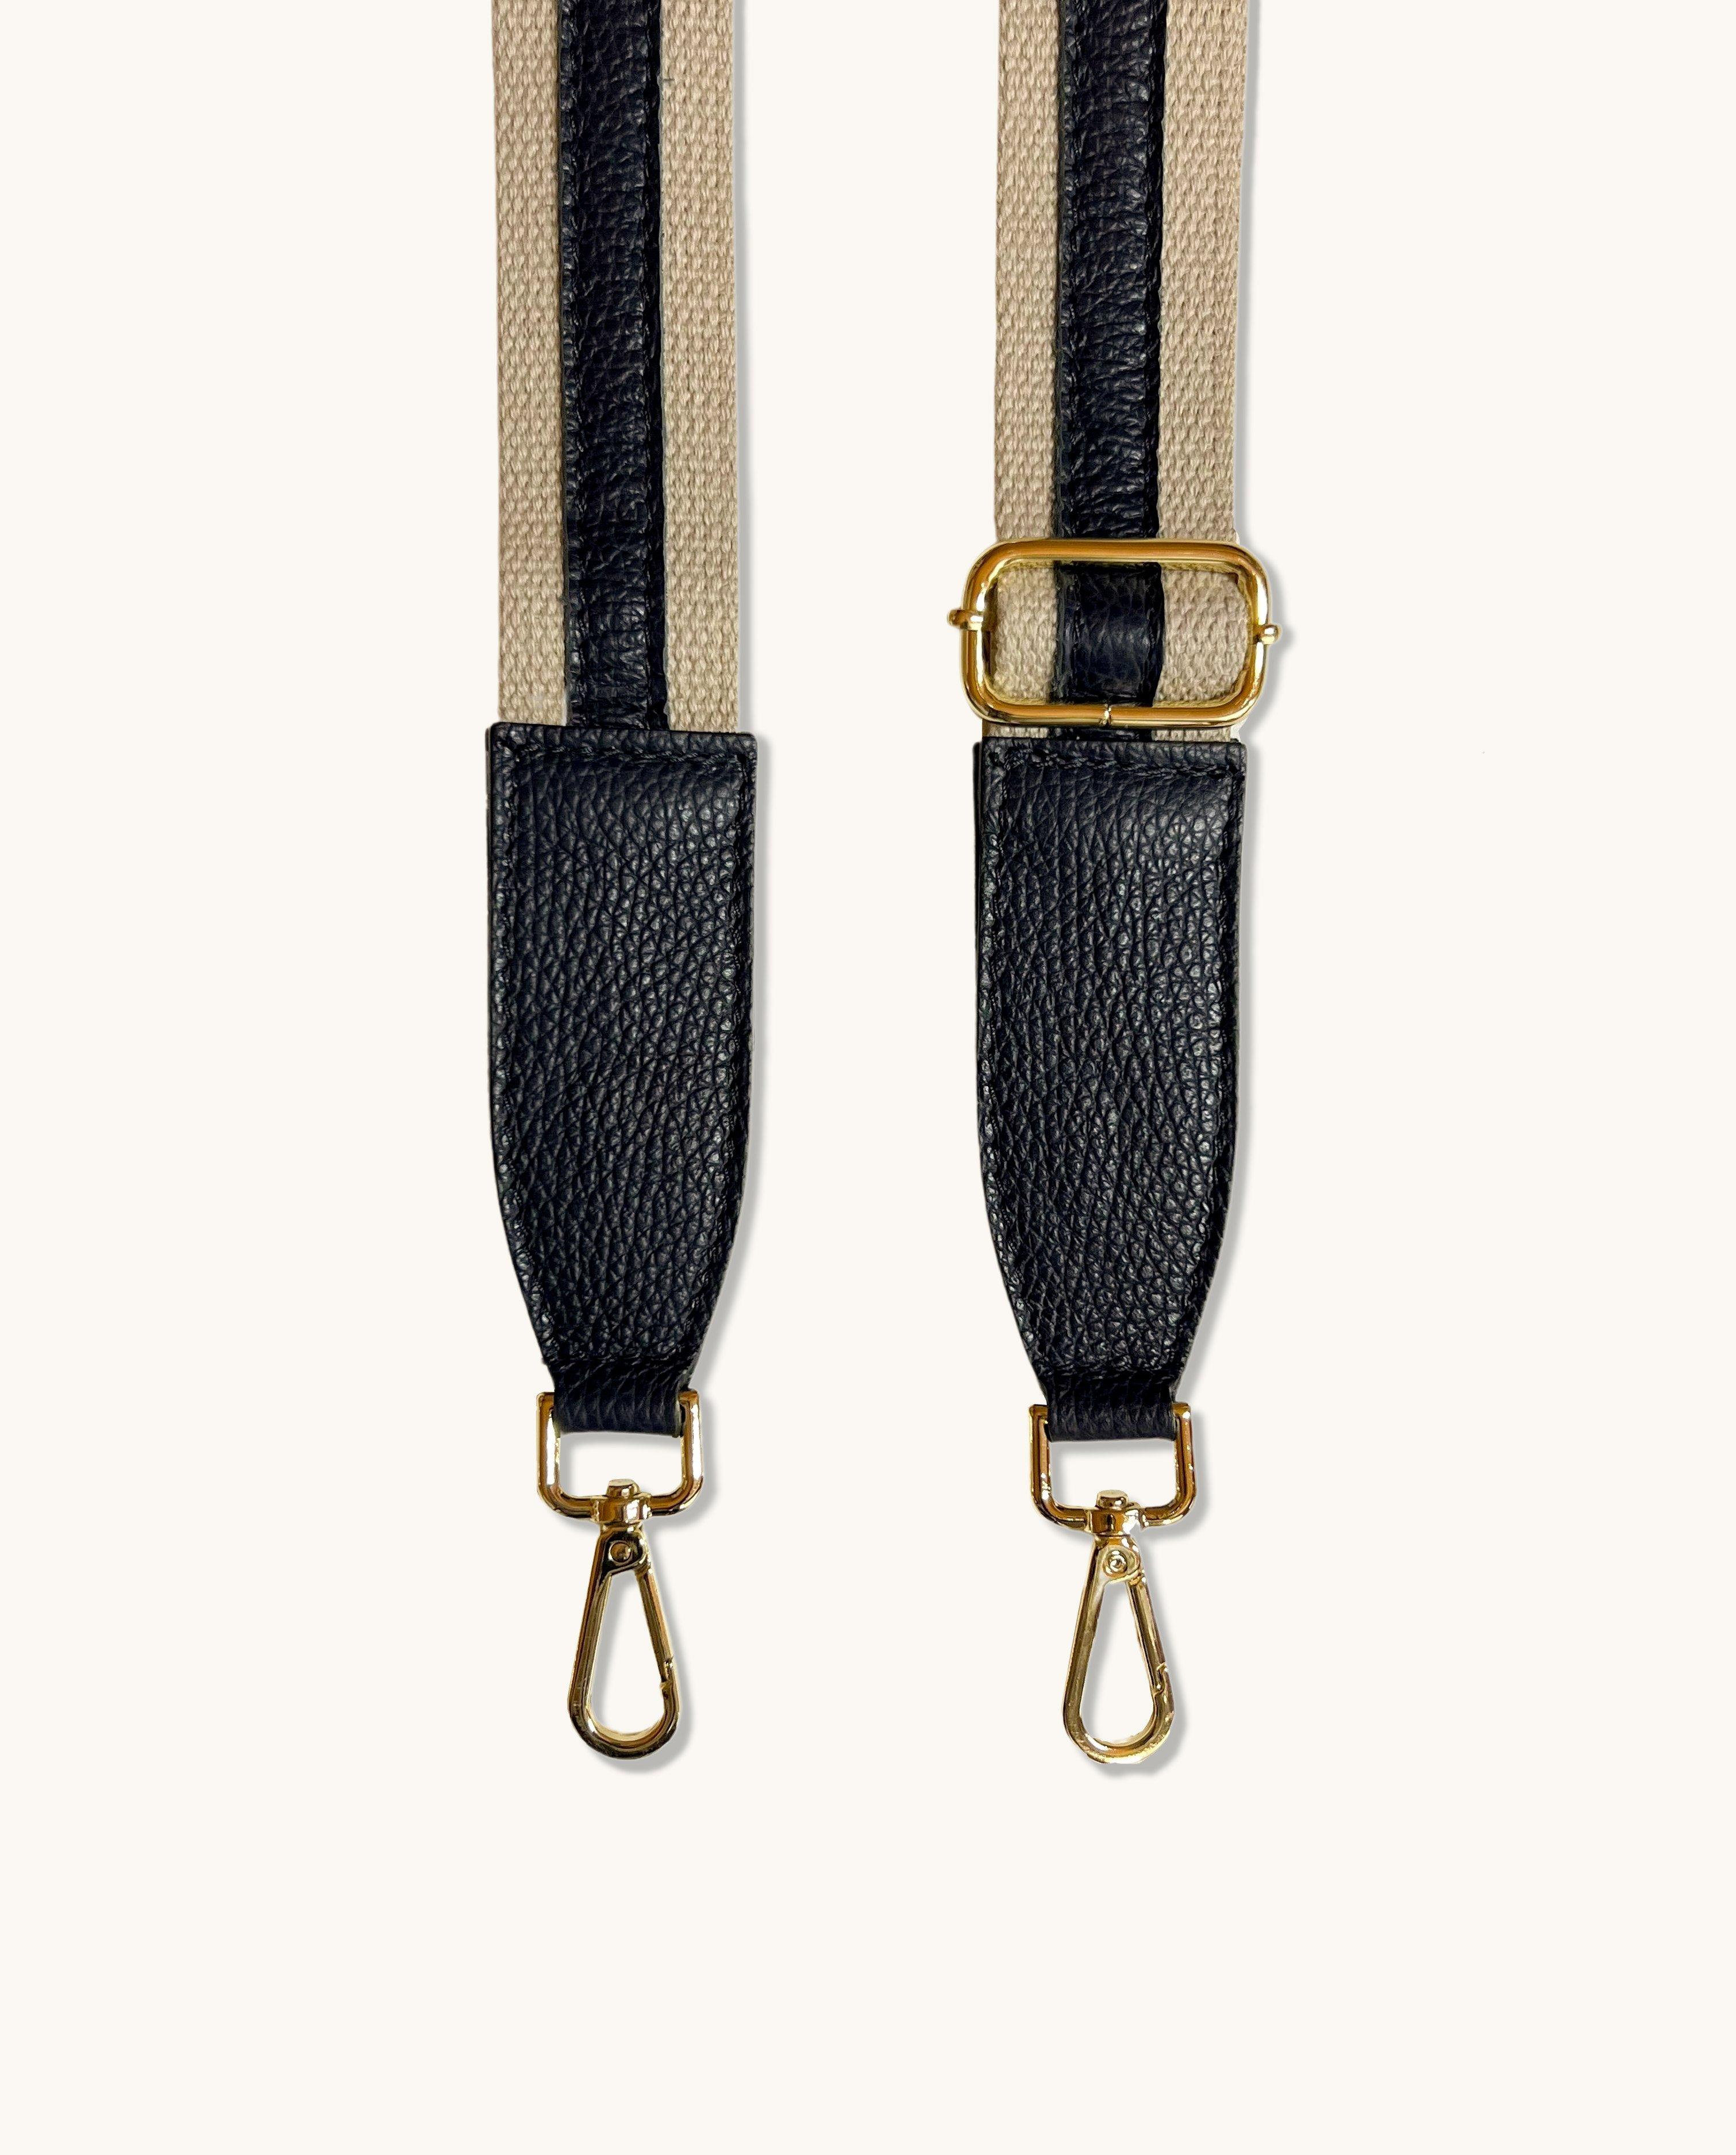 The Bloxsome Black Leather Crossbody Bag & Gold Chain Strap